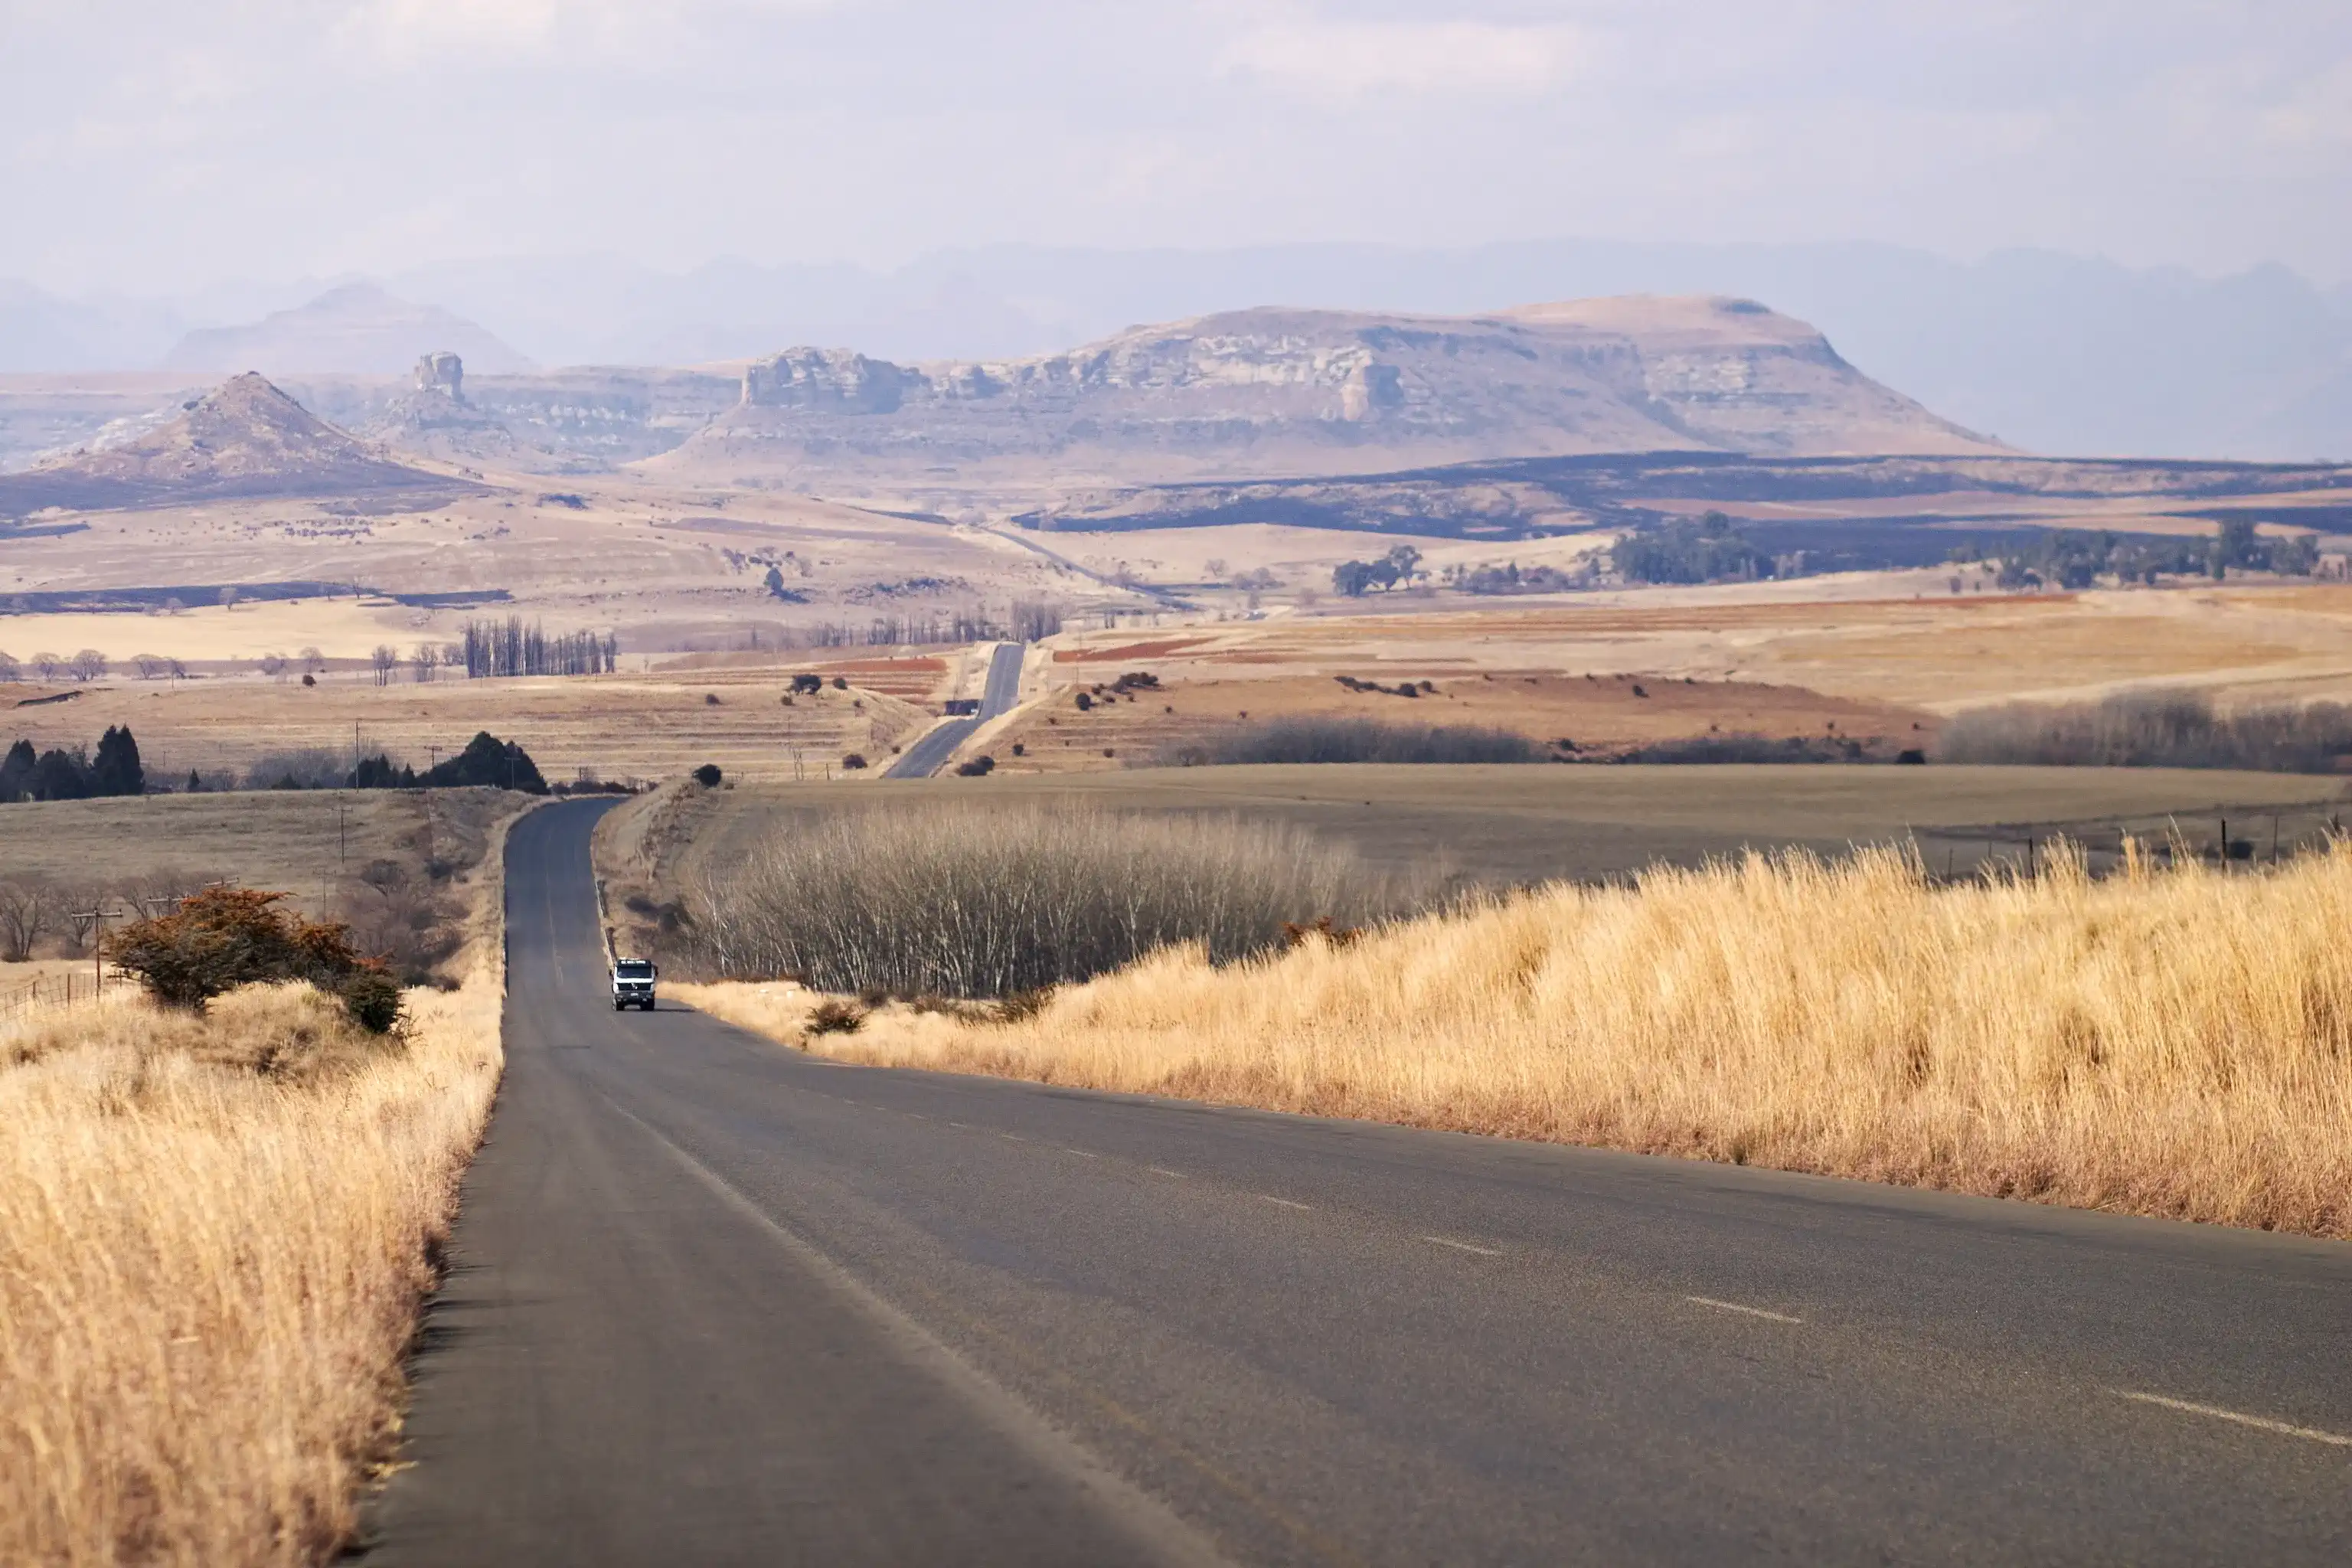 The road between Ficksburg and Clarens in South Africa runs through rolling winter farmlands.